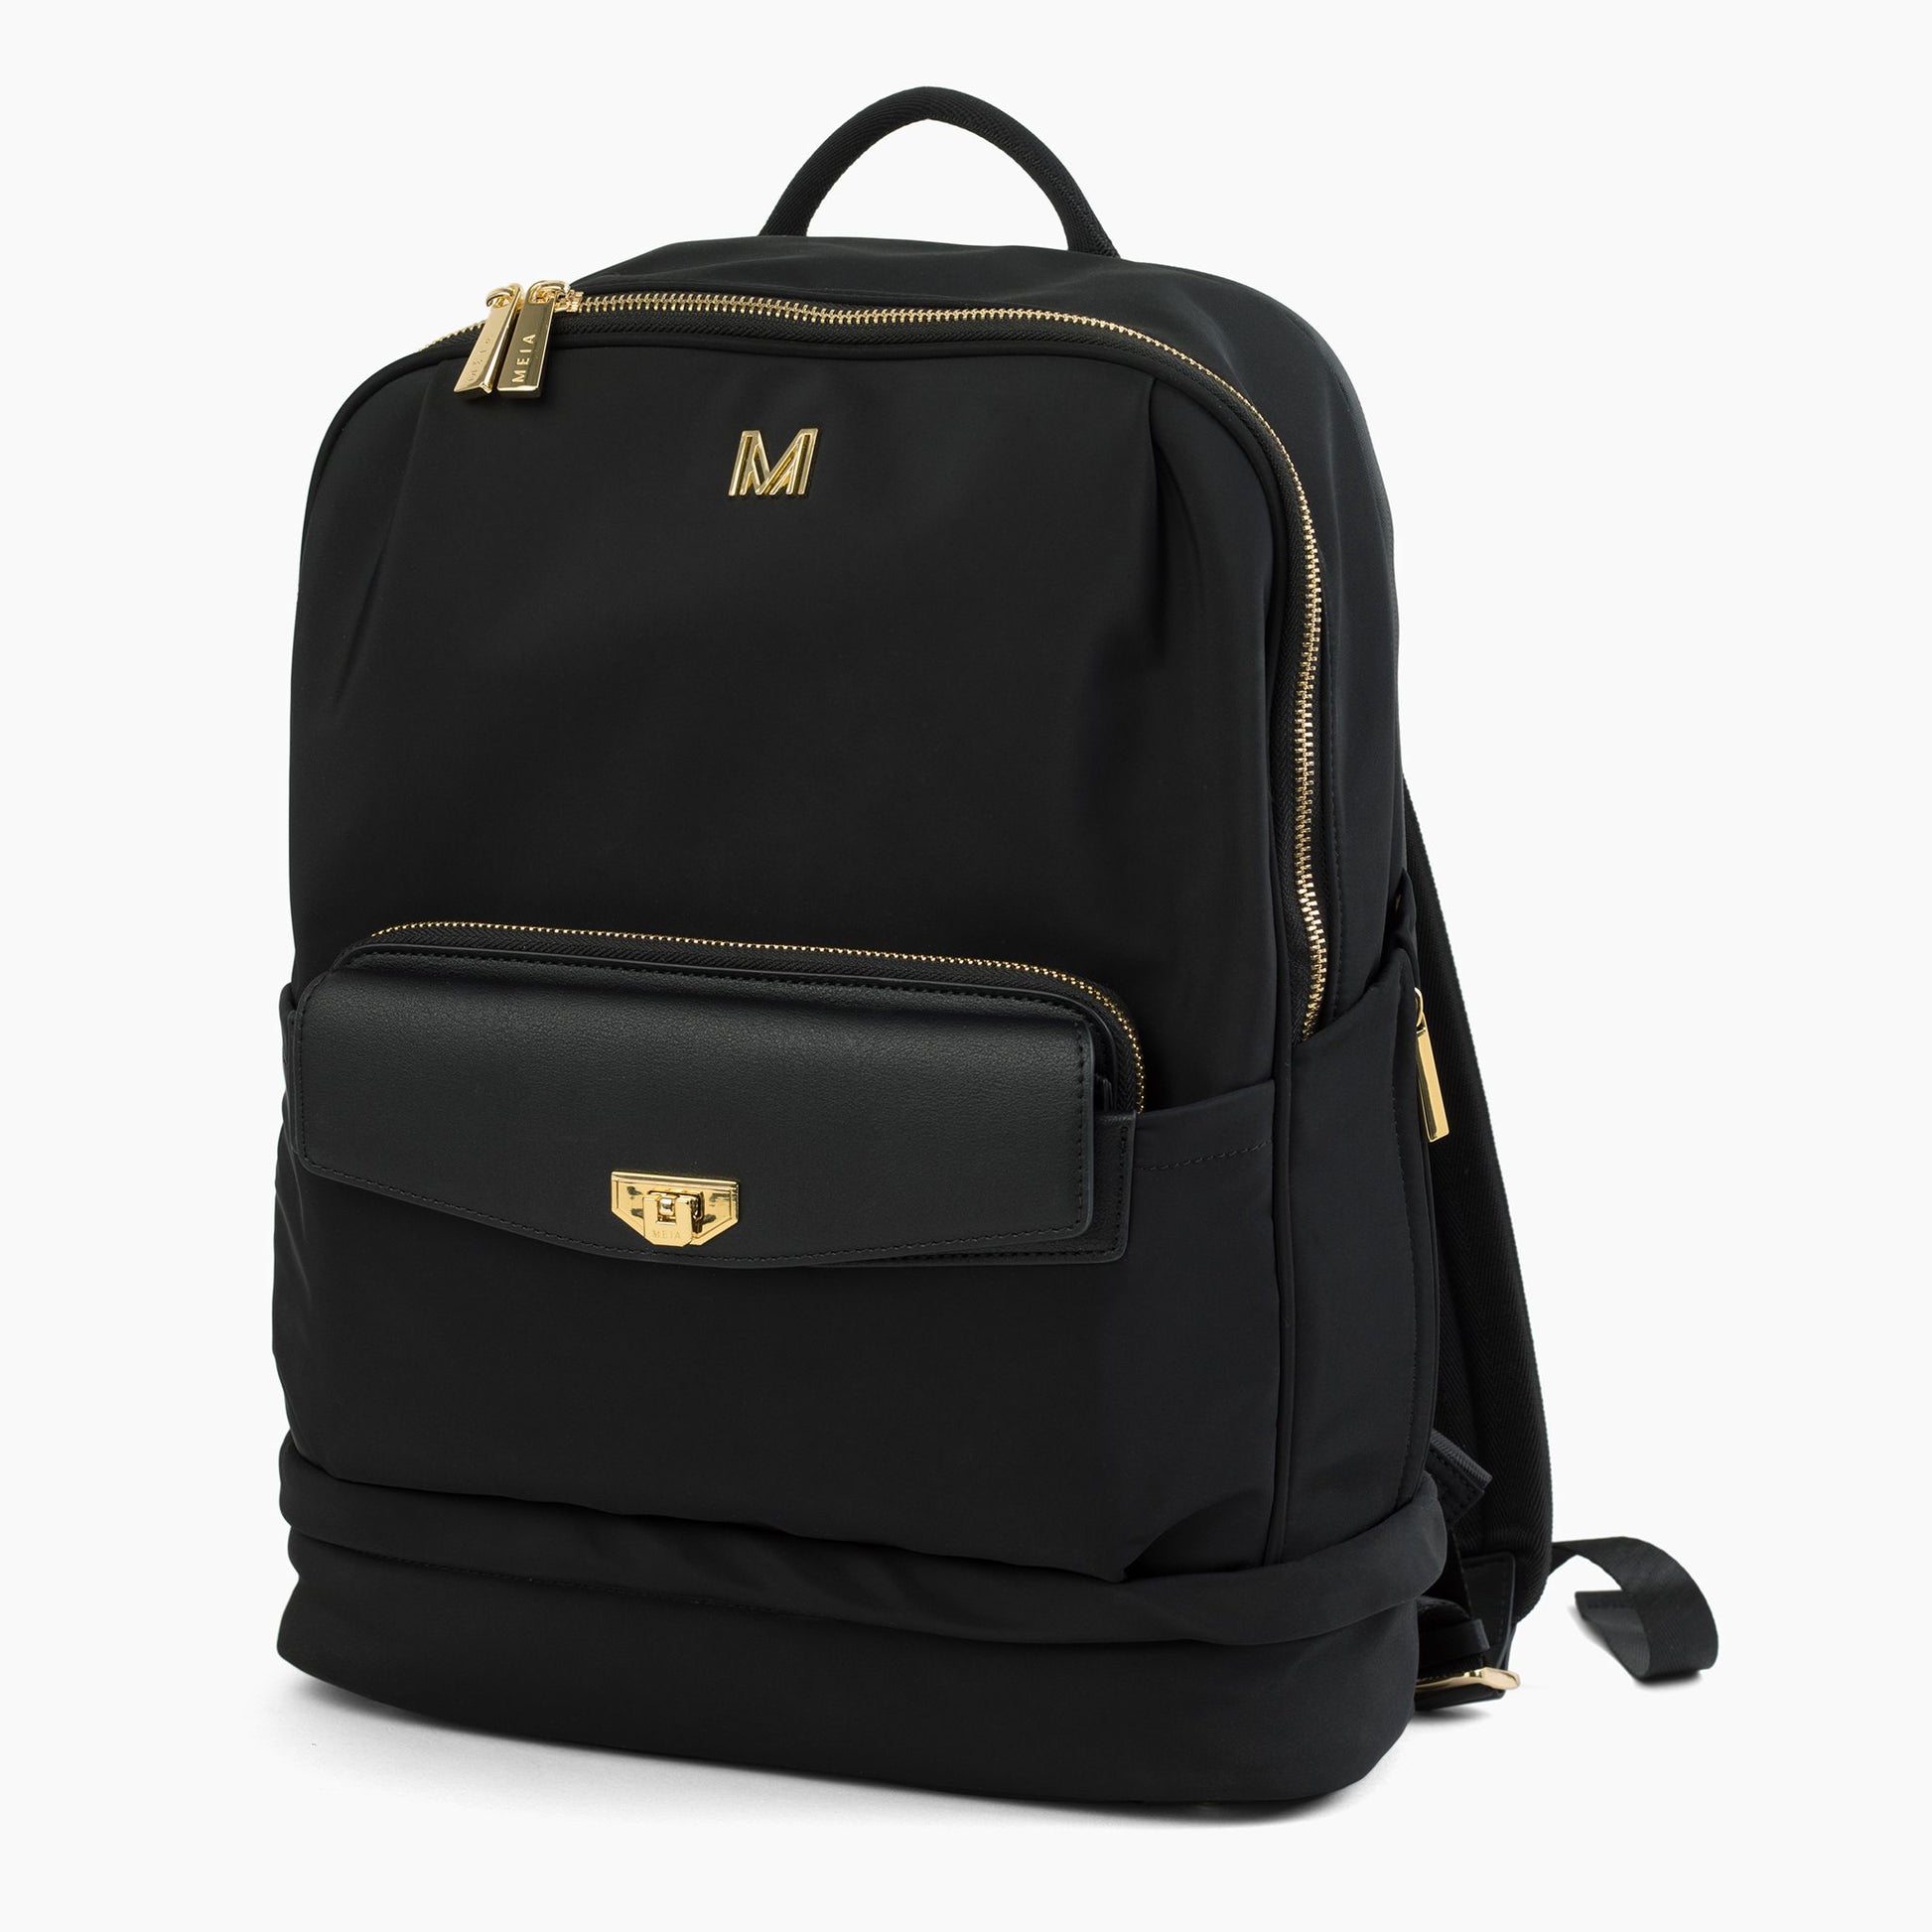 MEIA black and gold Work Travel Backpack with detachable clutch convertible to crossbody bag